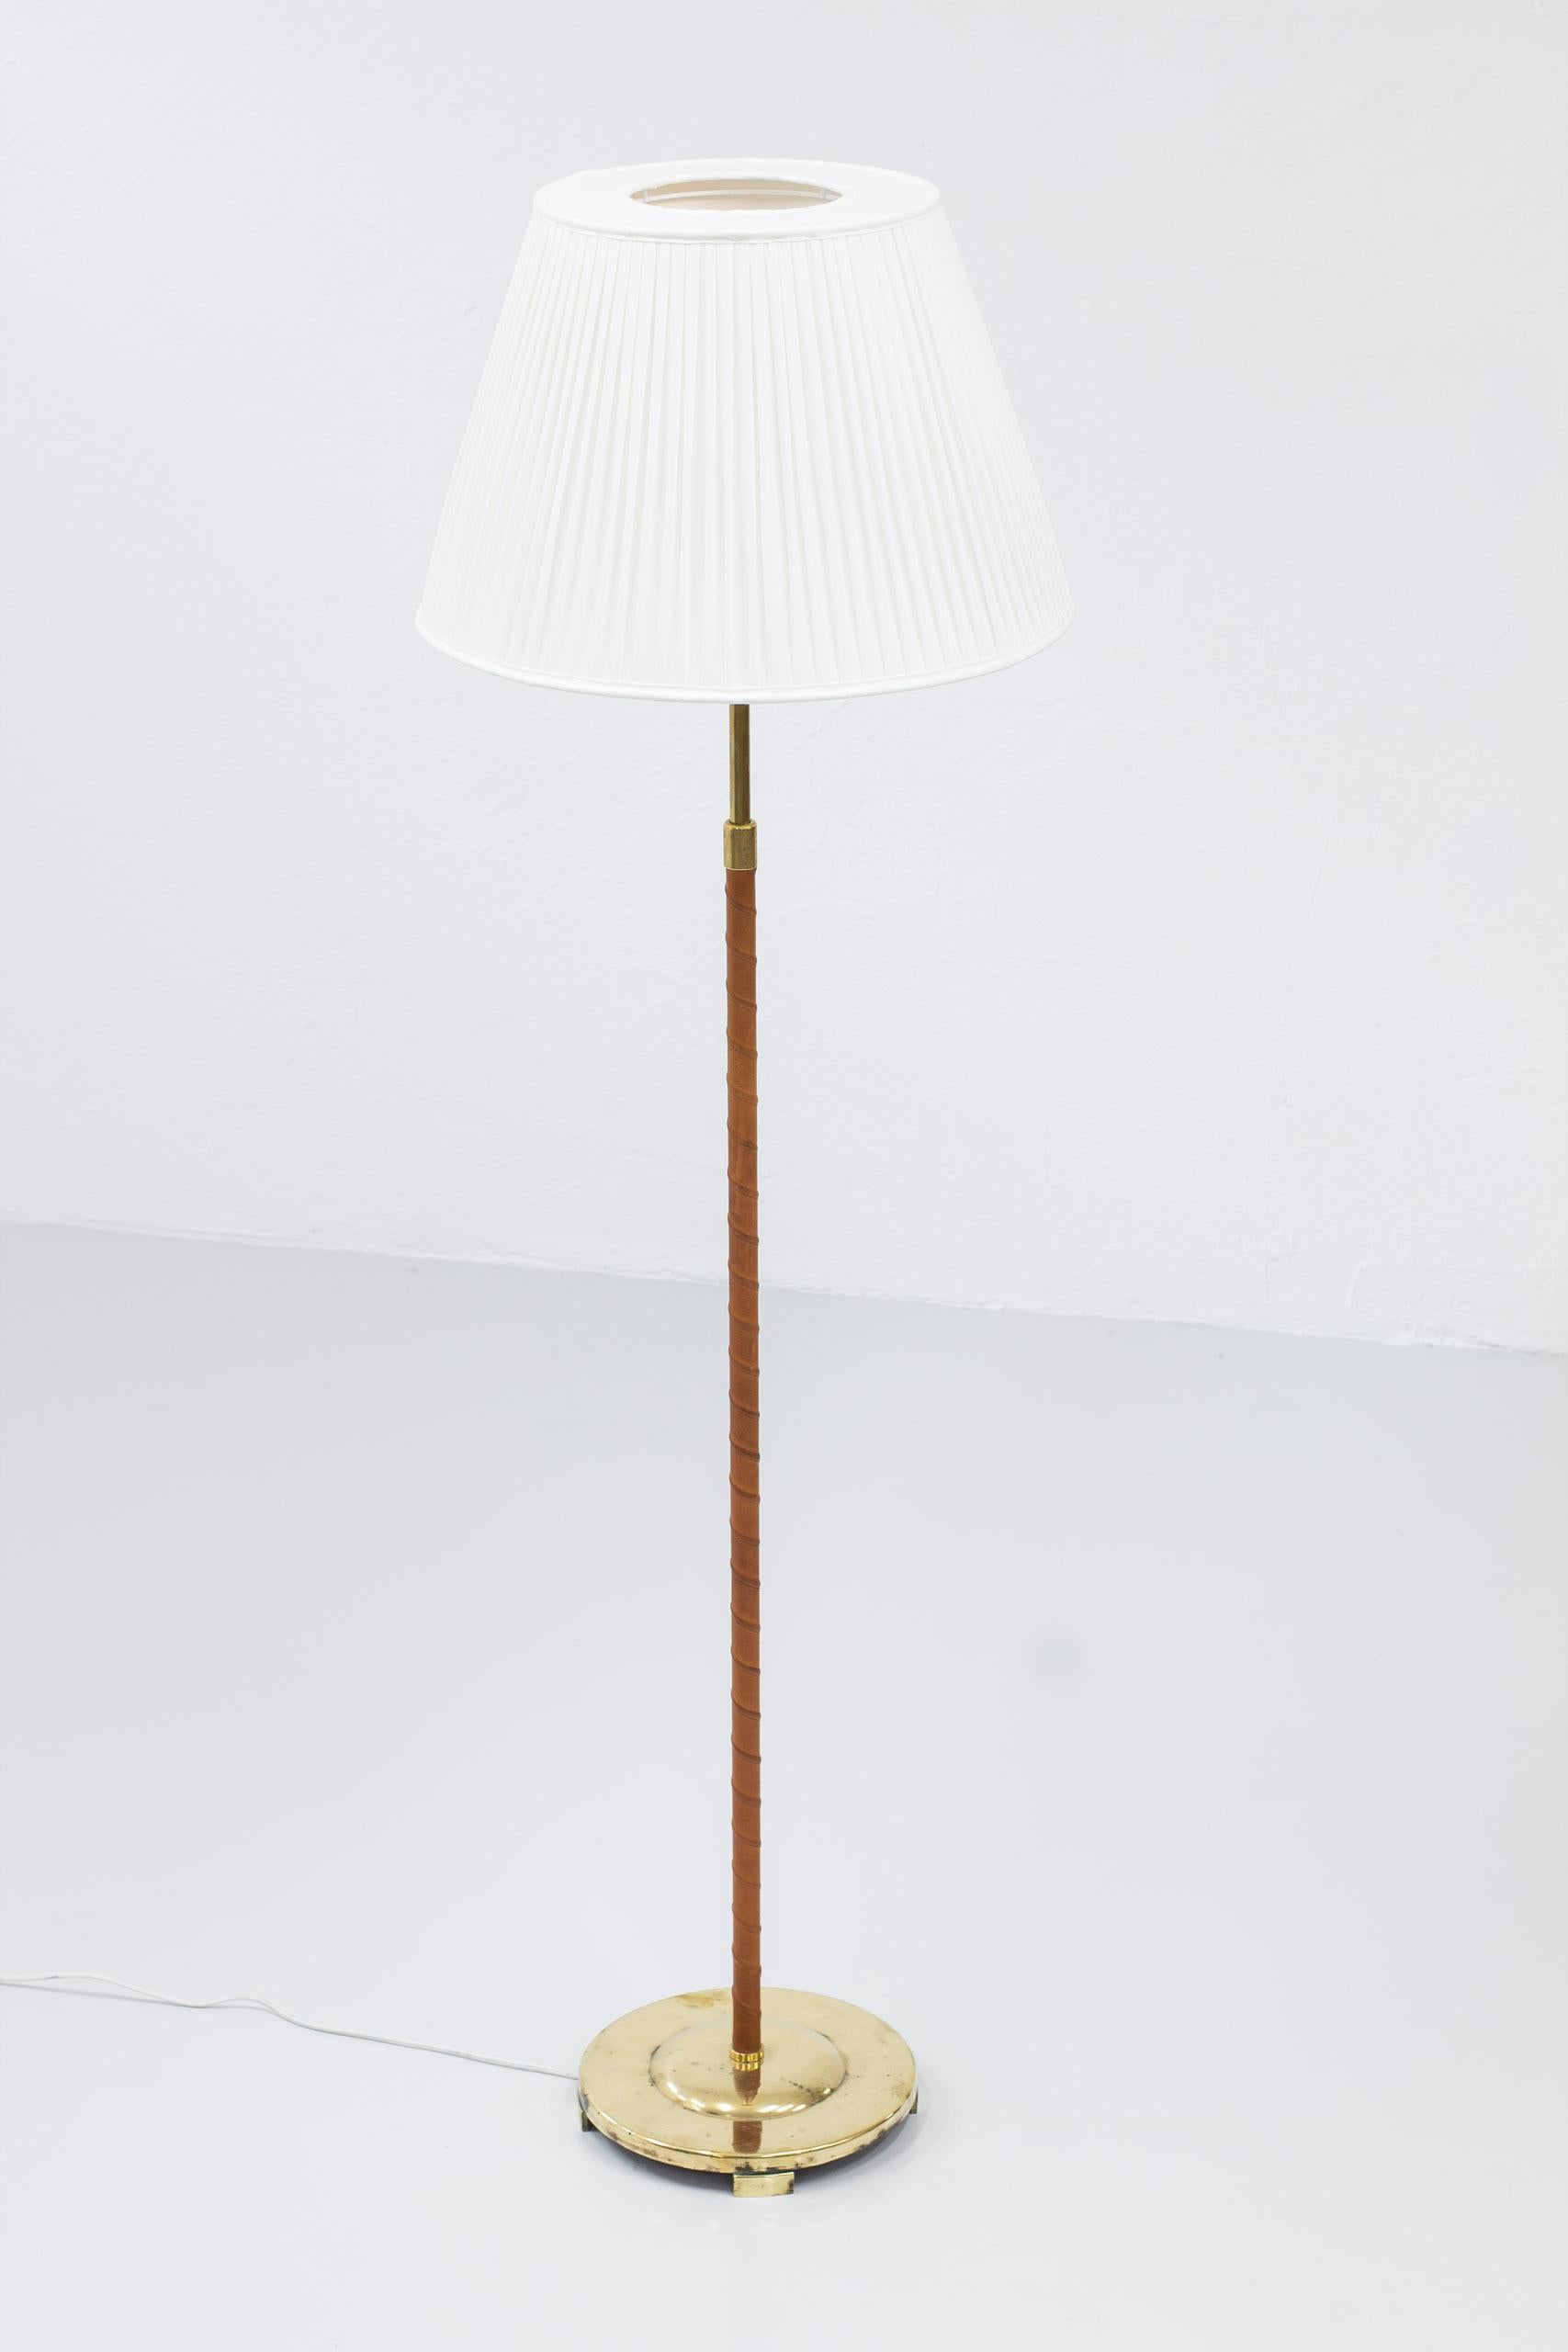 Leather and Brass Floor Lamp by Bertil Brisborg for NK, Sweden, 1940s For Sale 3